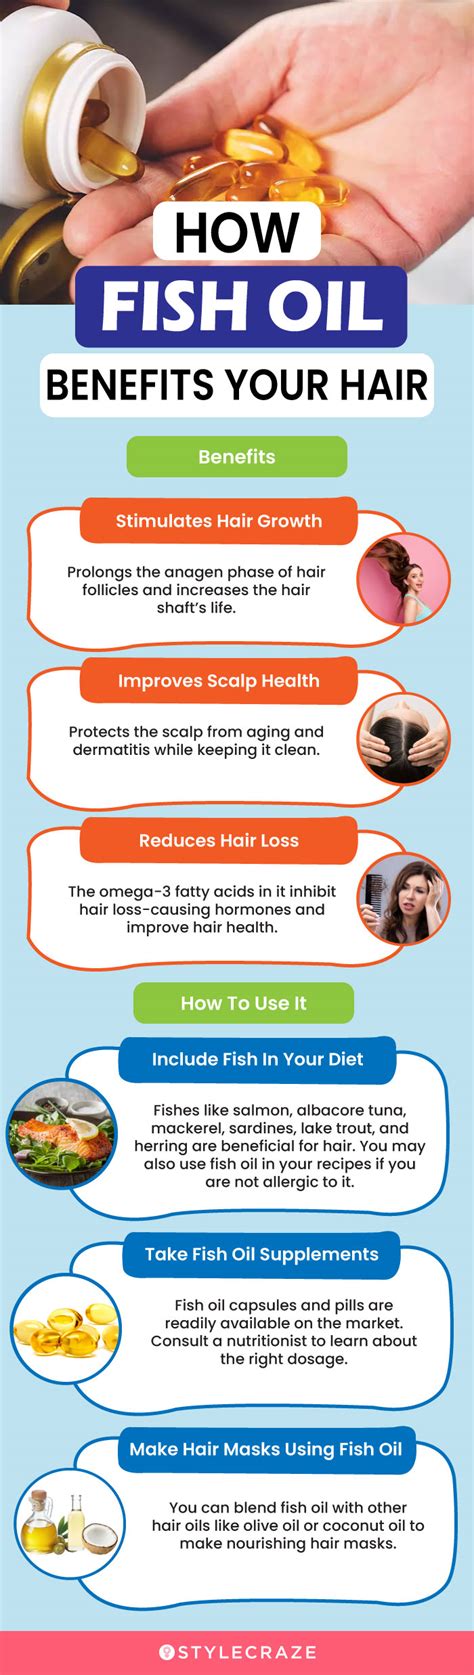 Fish oils and hair growth